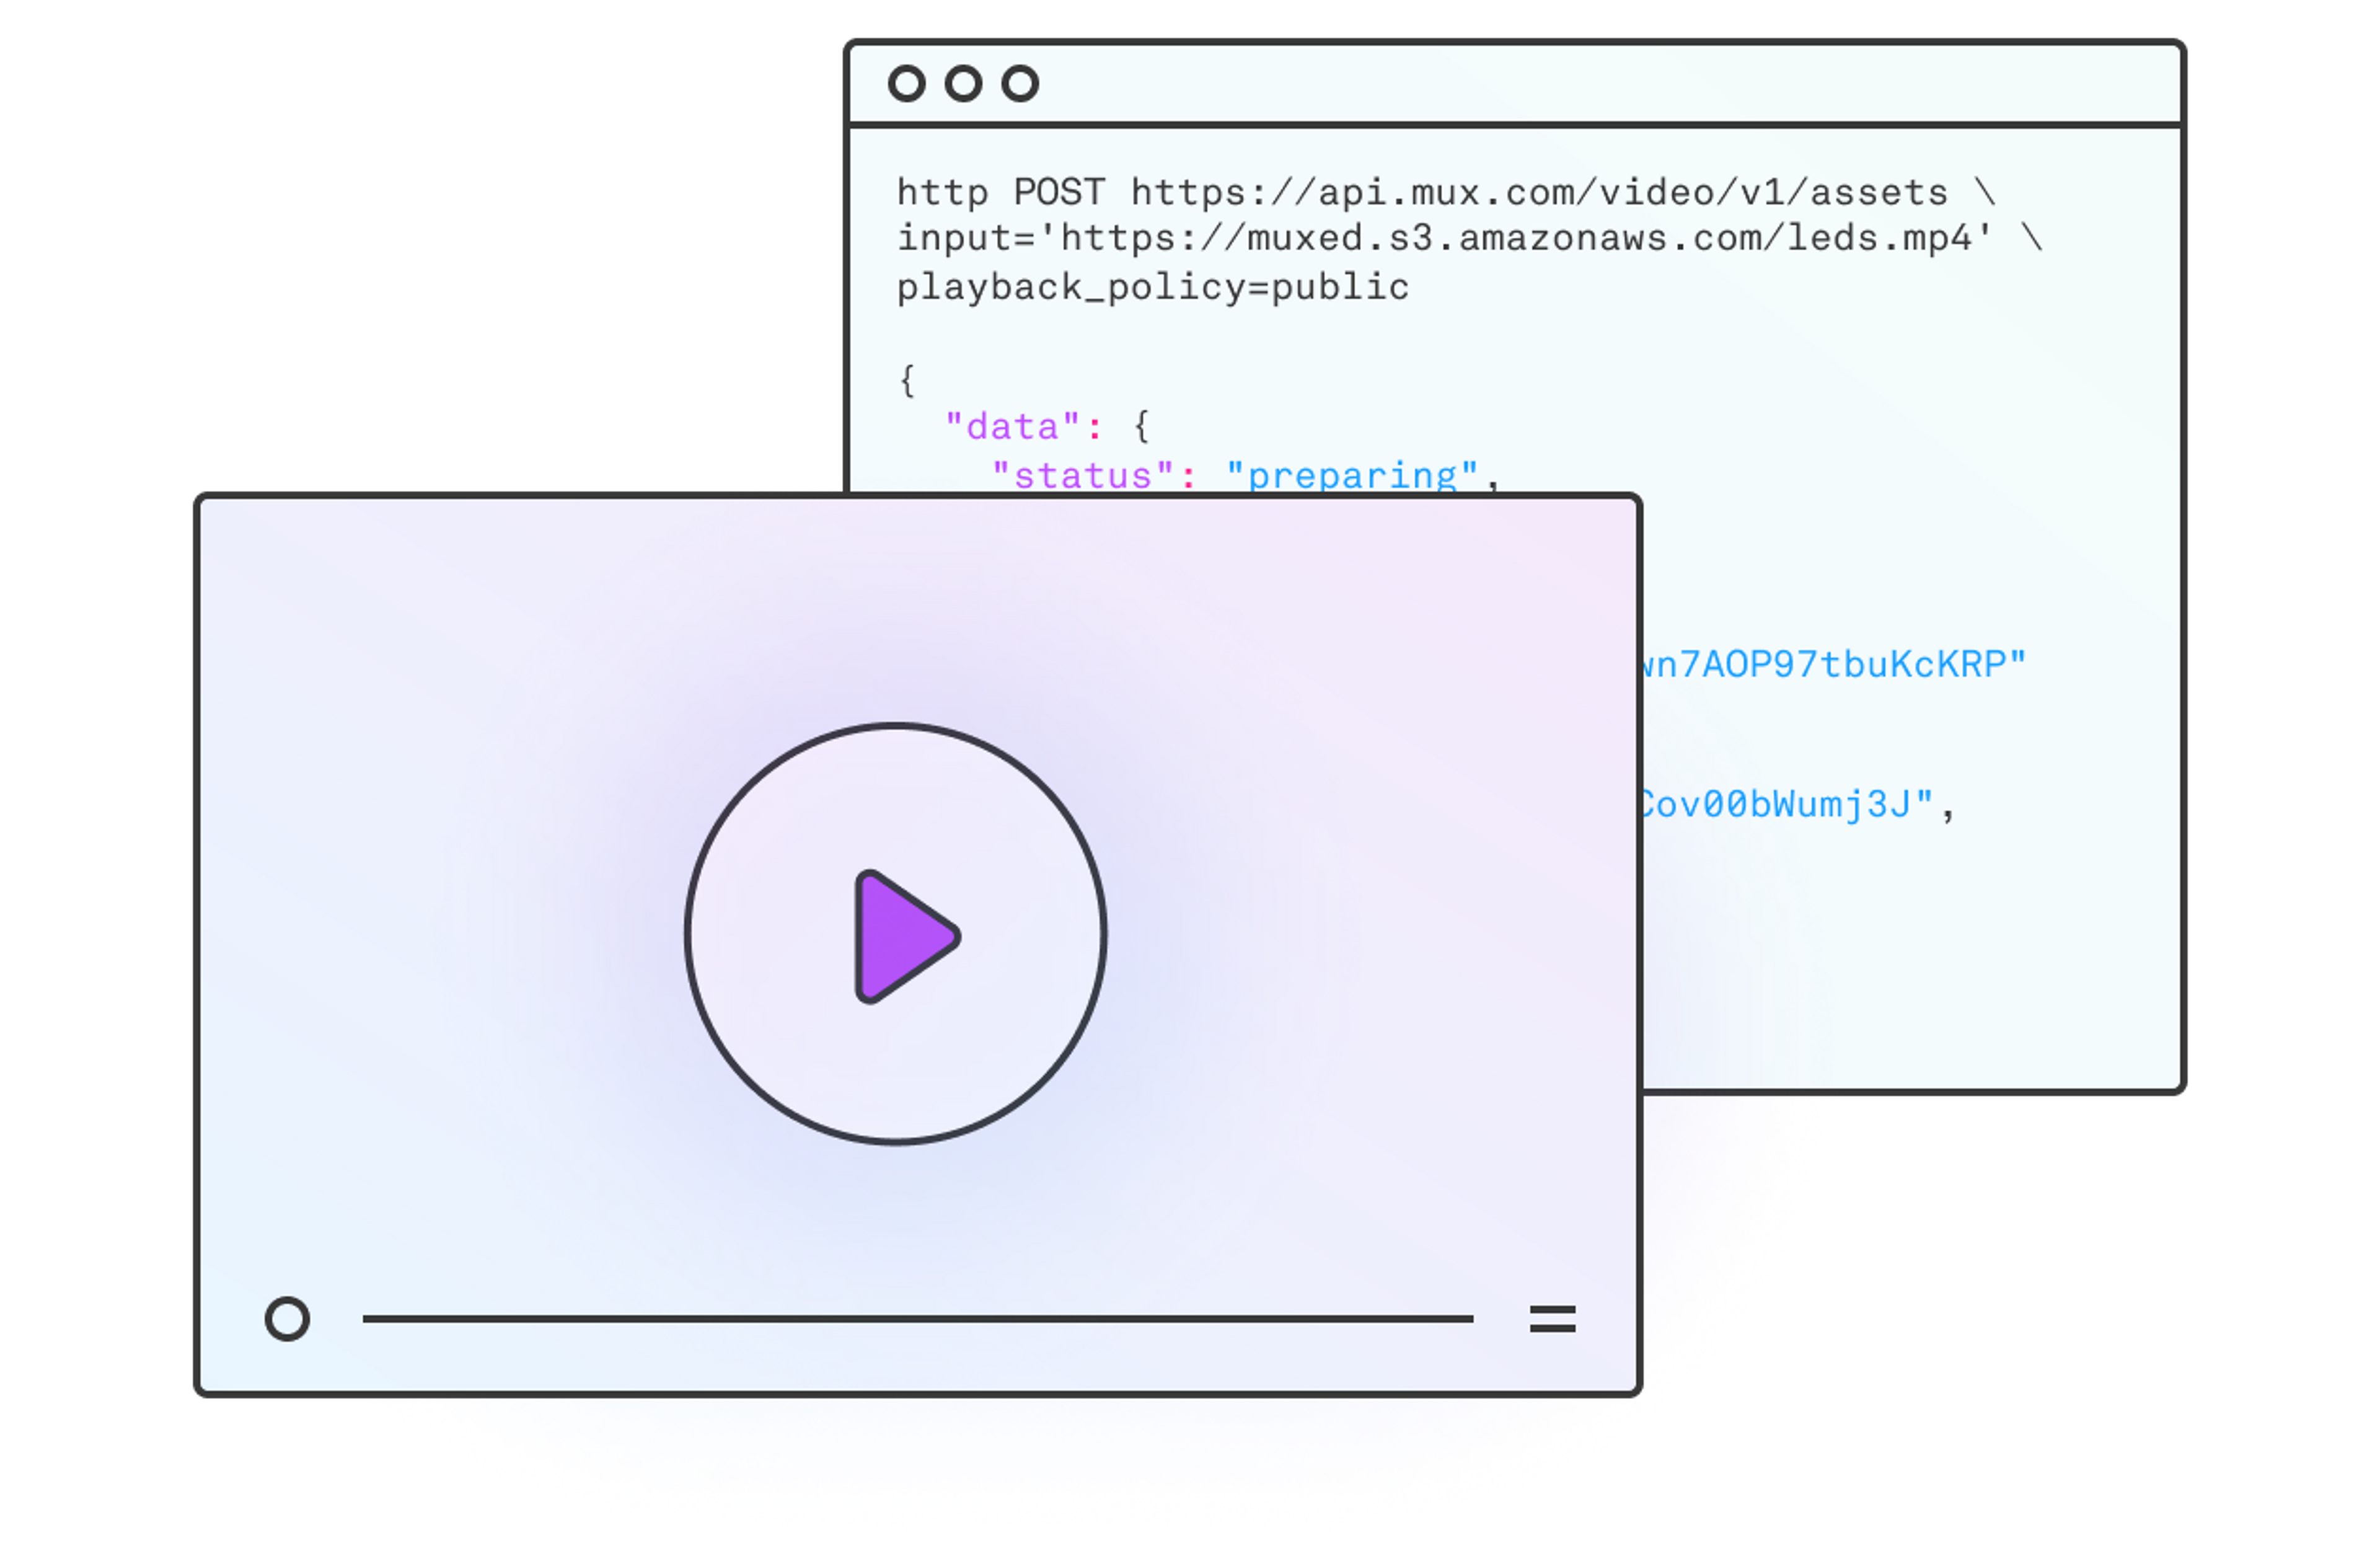 Image with of a video player with a play button overlaid on an image of simple API code